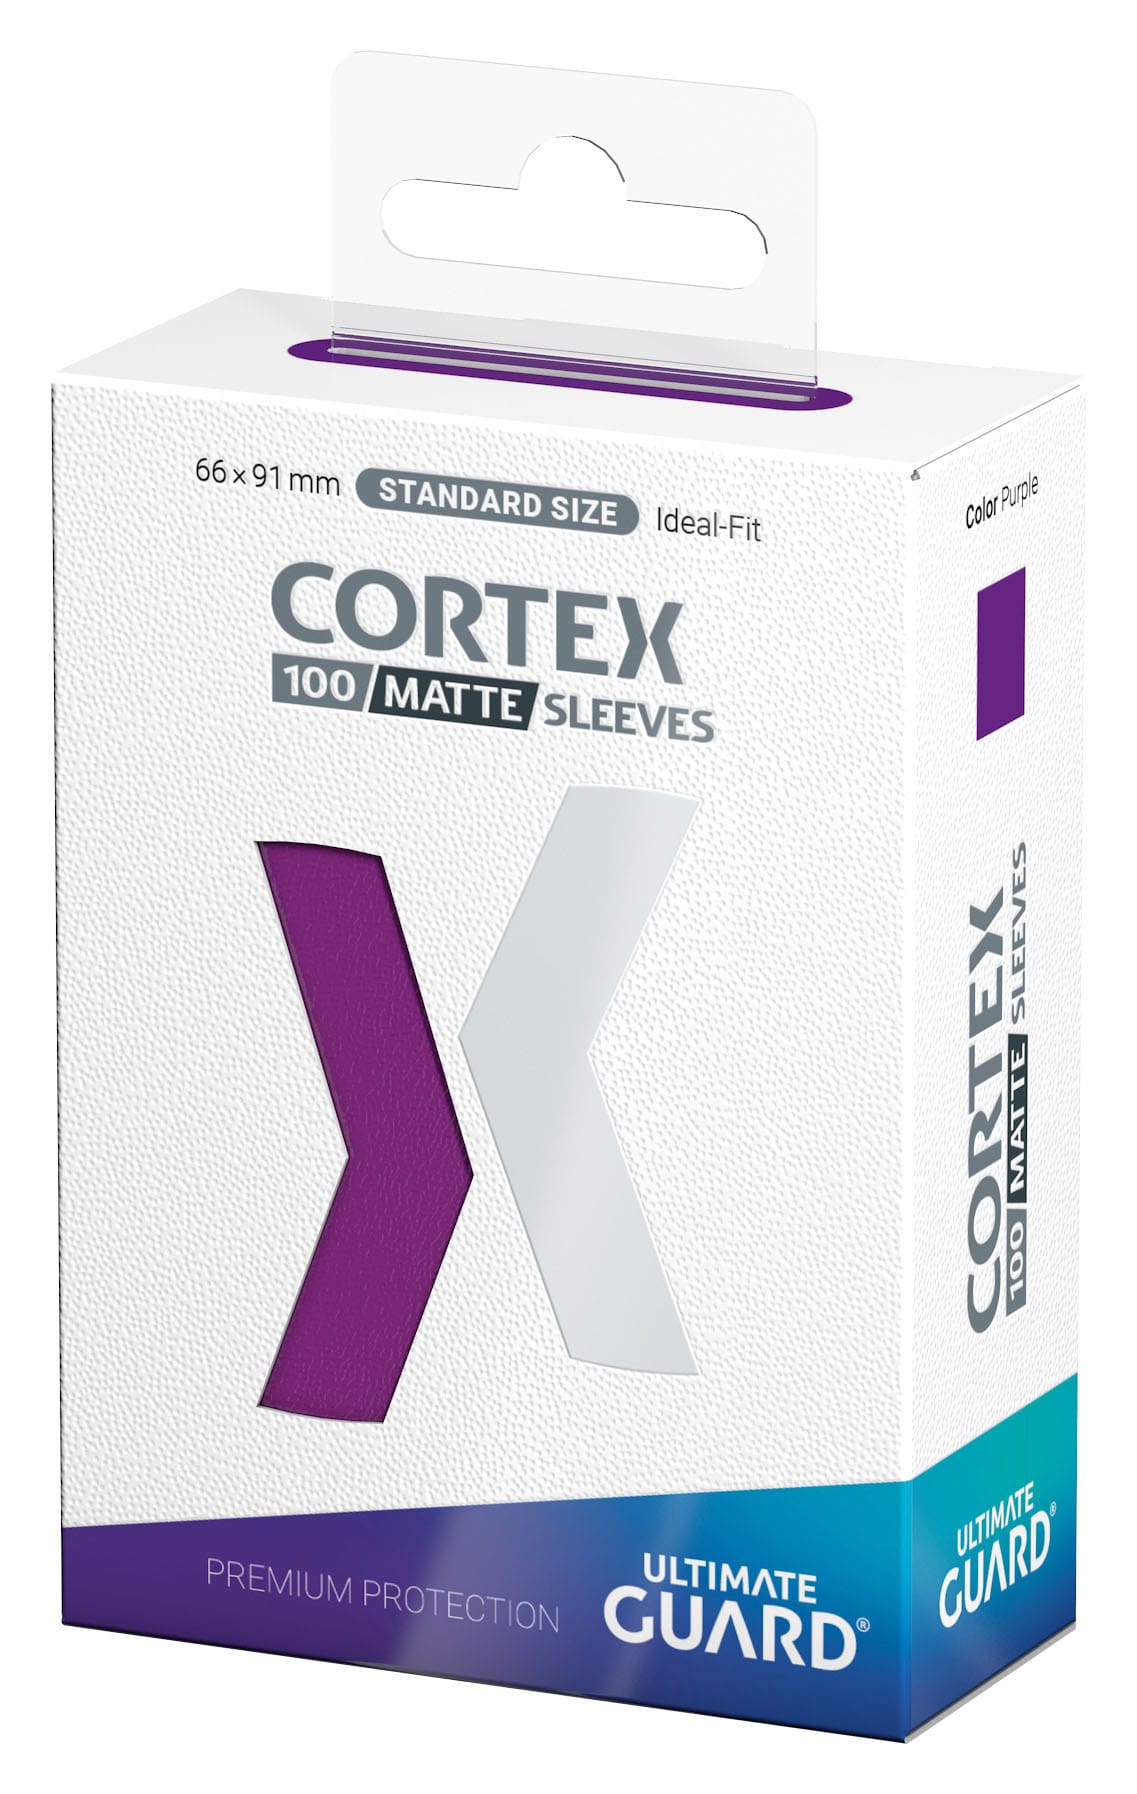 Ultimate Guard - Cortex Sleeves - Standard Size (100)